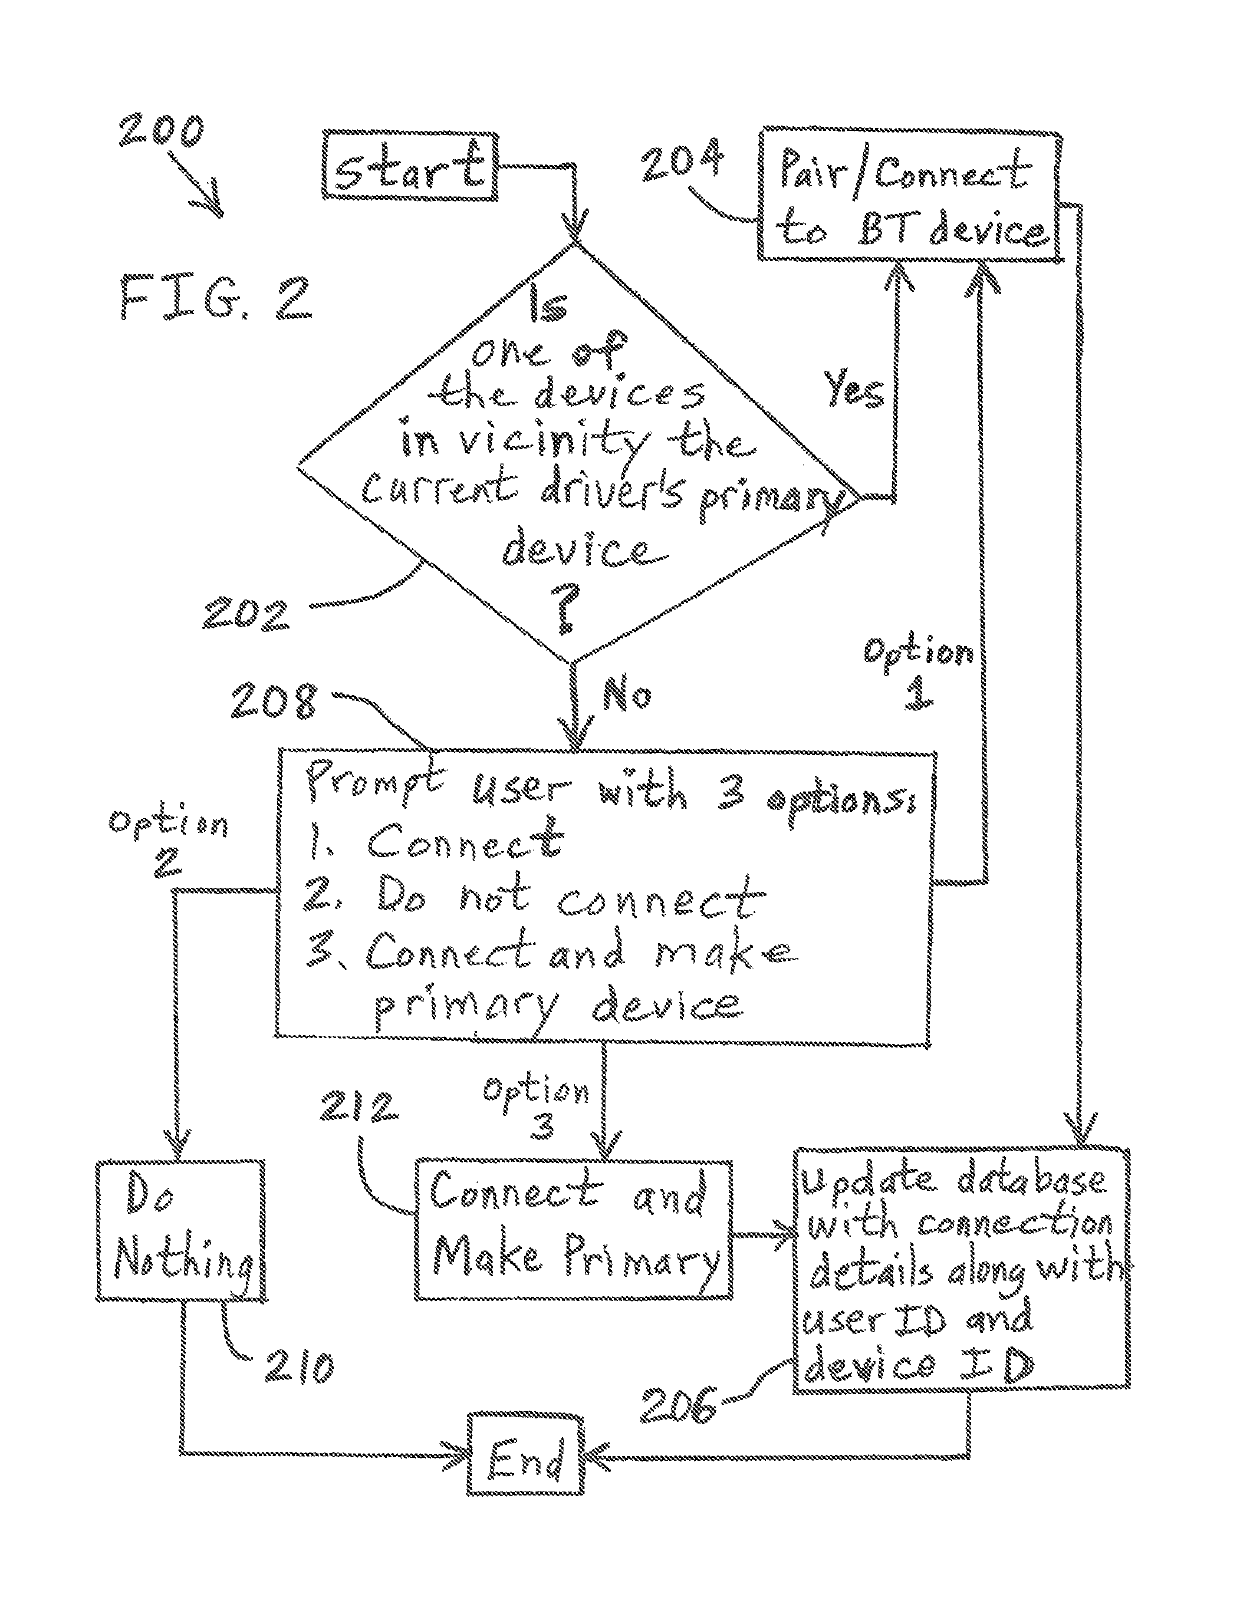 Self-learning bluetooth infotainment connectivity